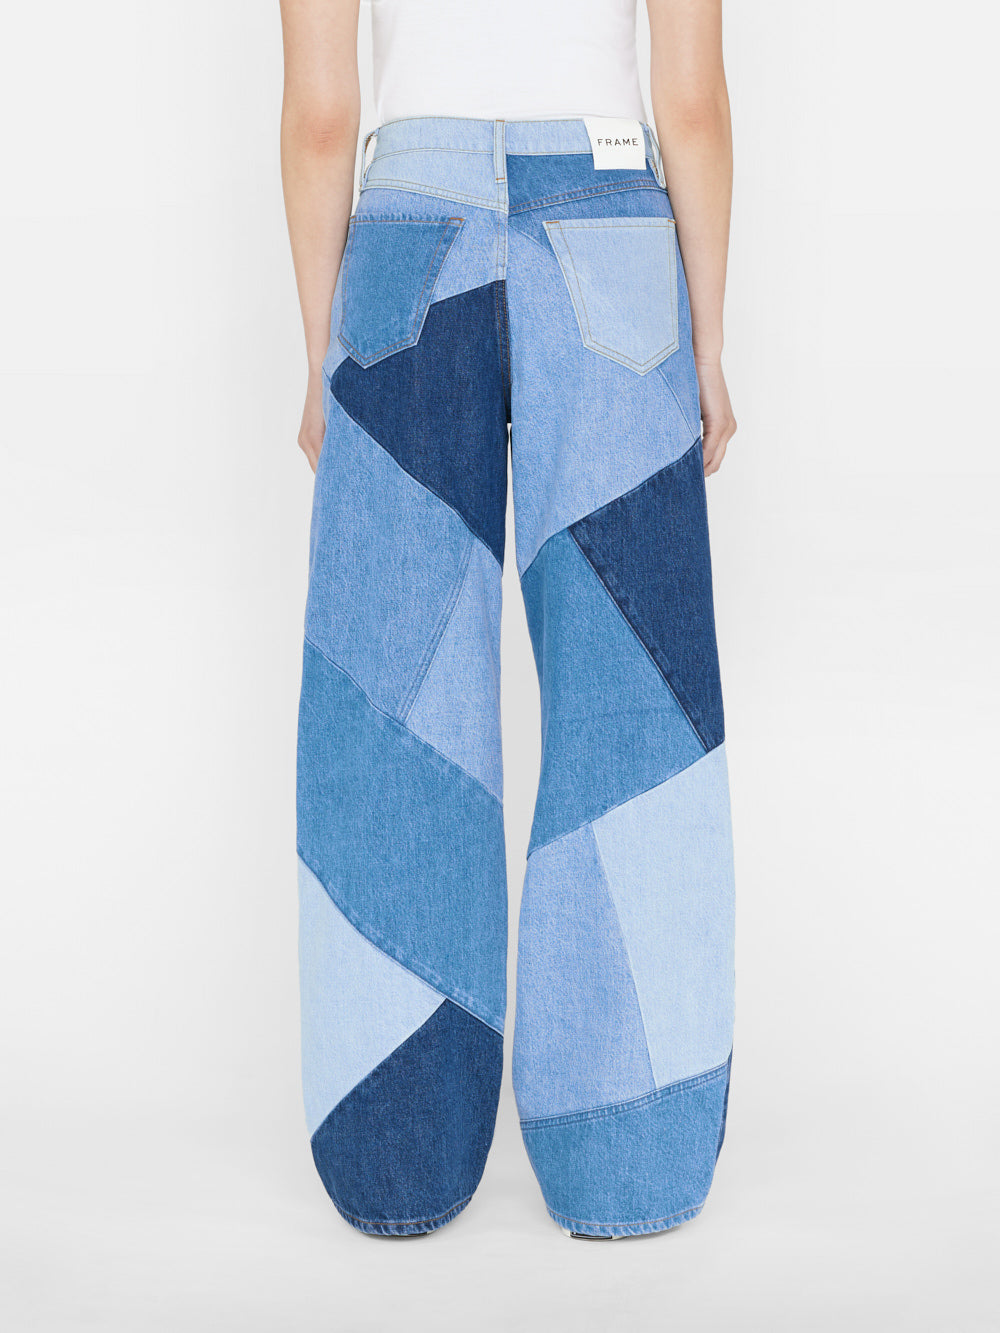 Patchwork Le High 'N' Tight Wide Leg in Blue Compilation – FRAME